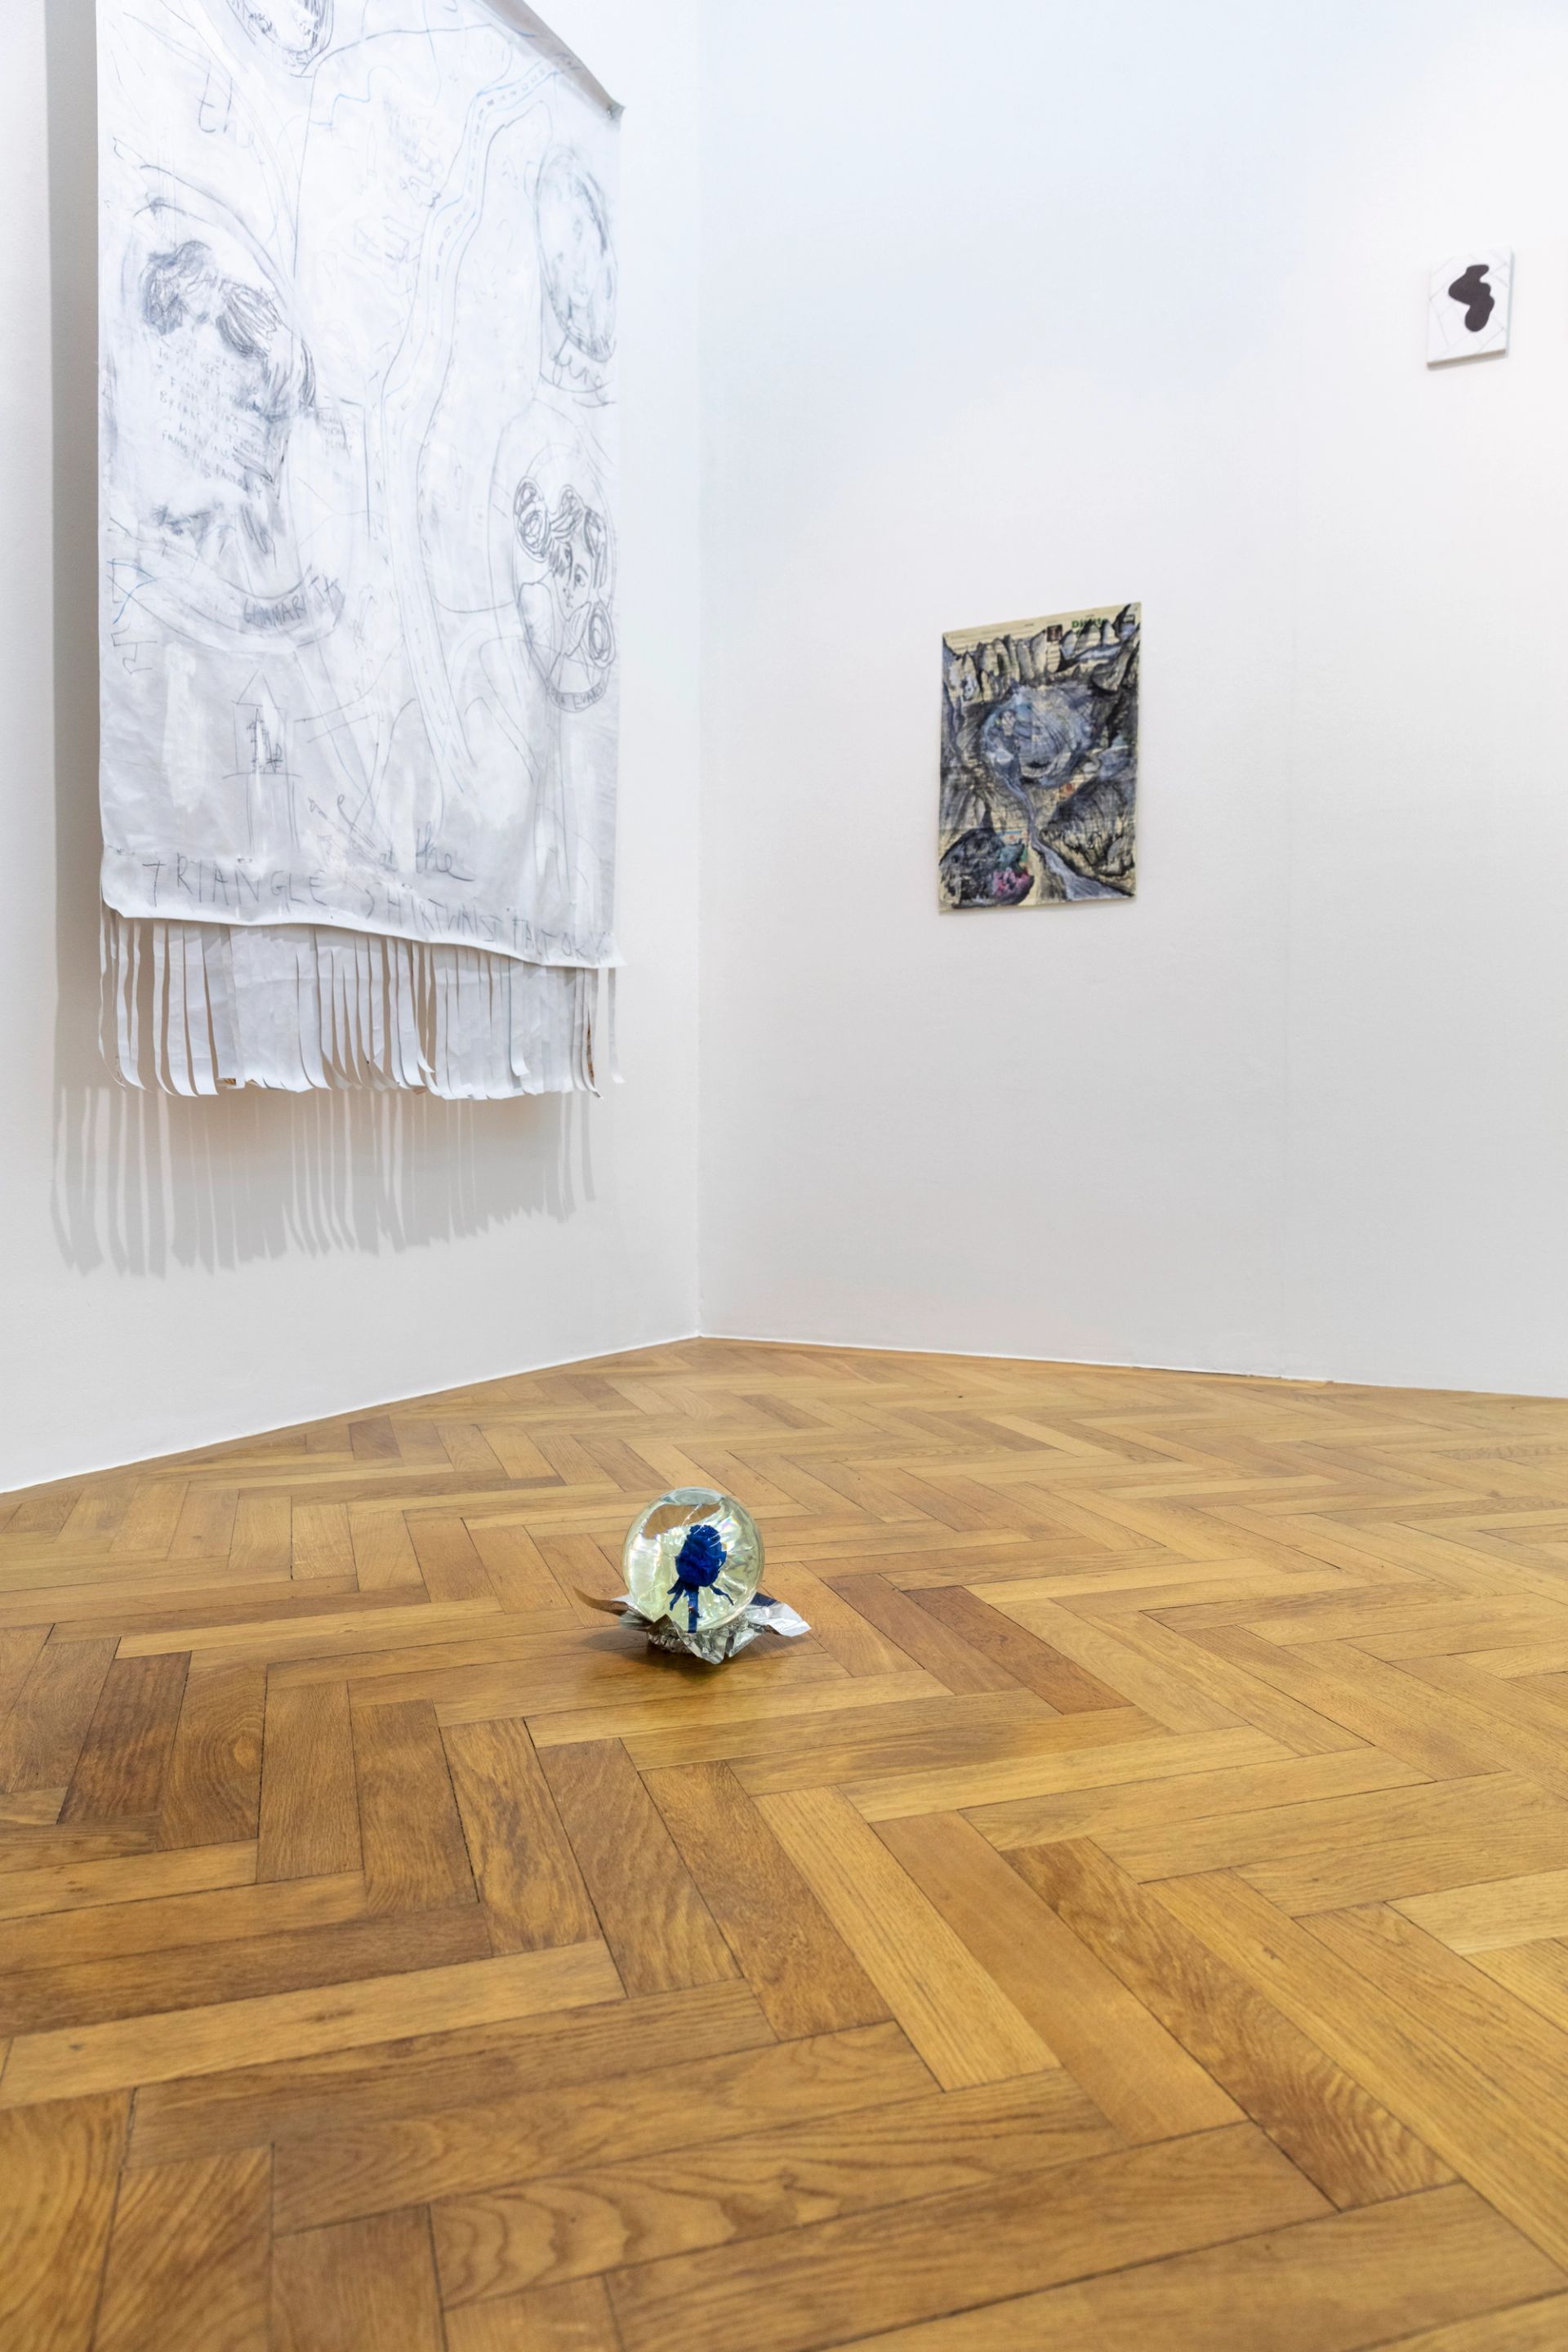 Anna McCarthy, Washing Cycle, 2022, installation view / on floor: “Cemetery Rose”, 2022, glass, water, rose, acrylic, 17 × 15 × 15cm  